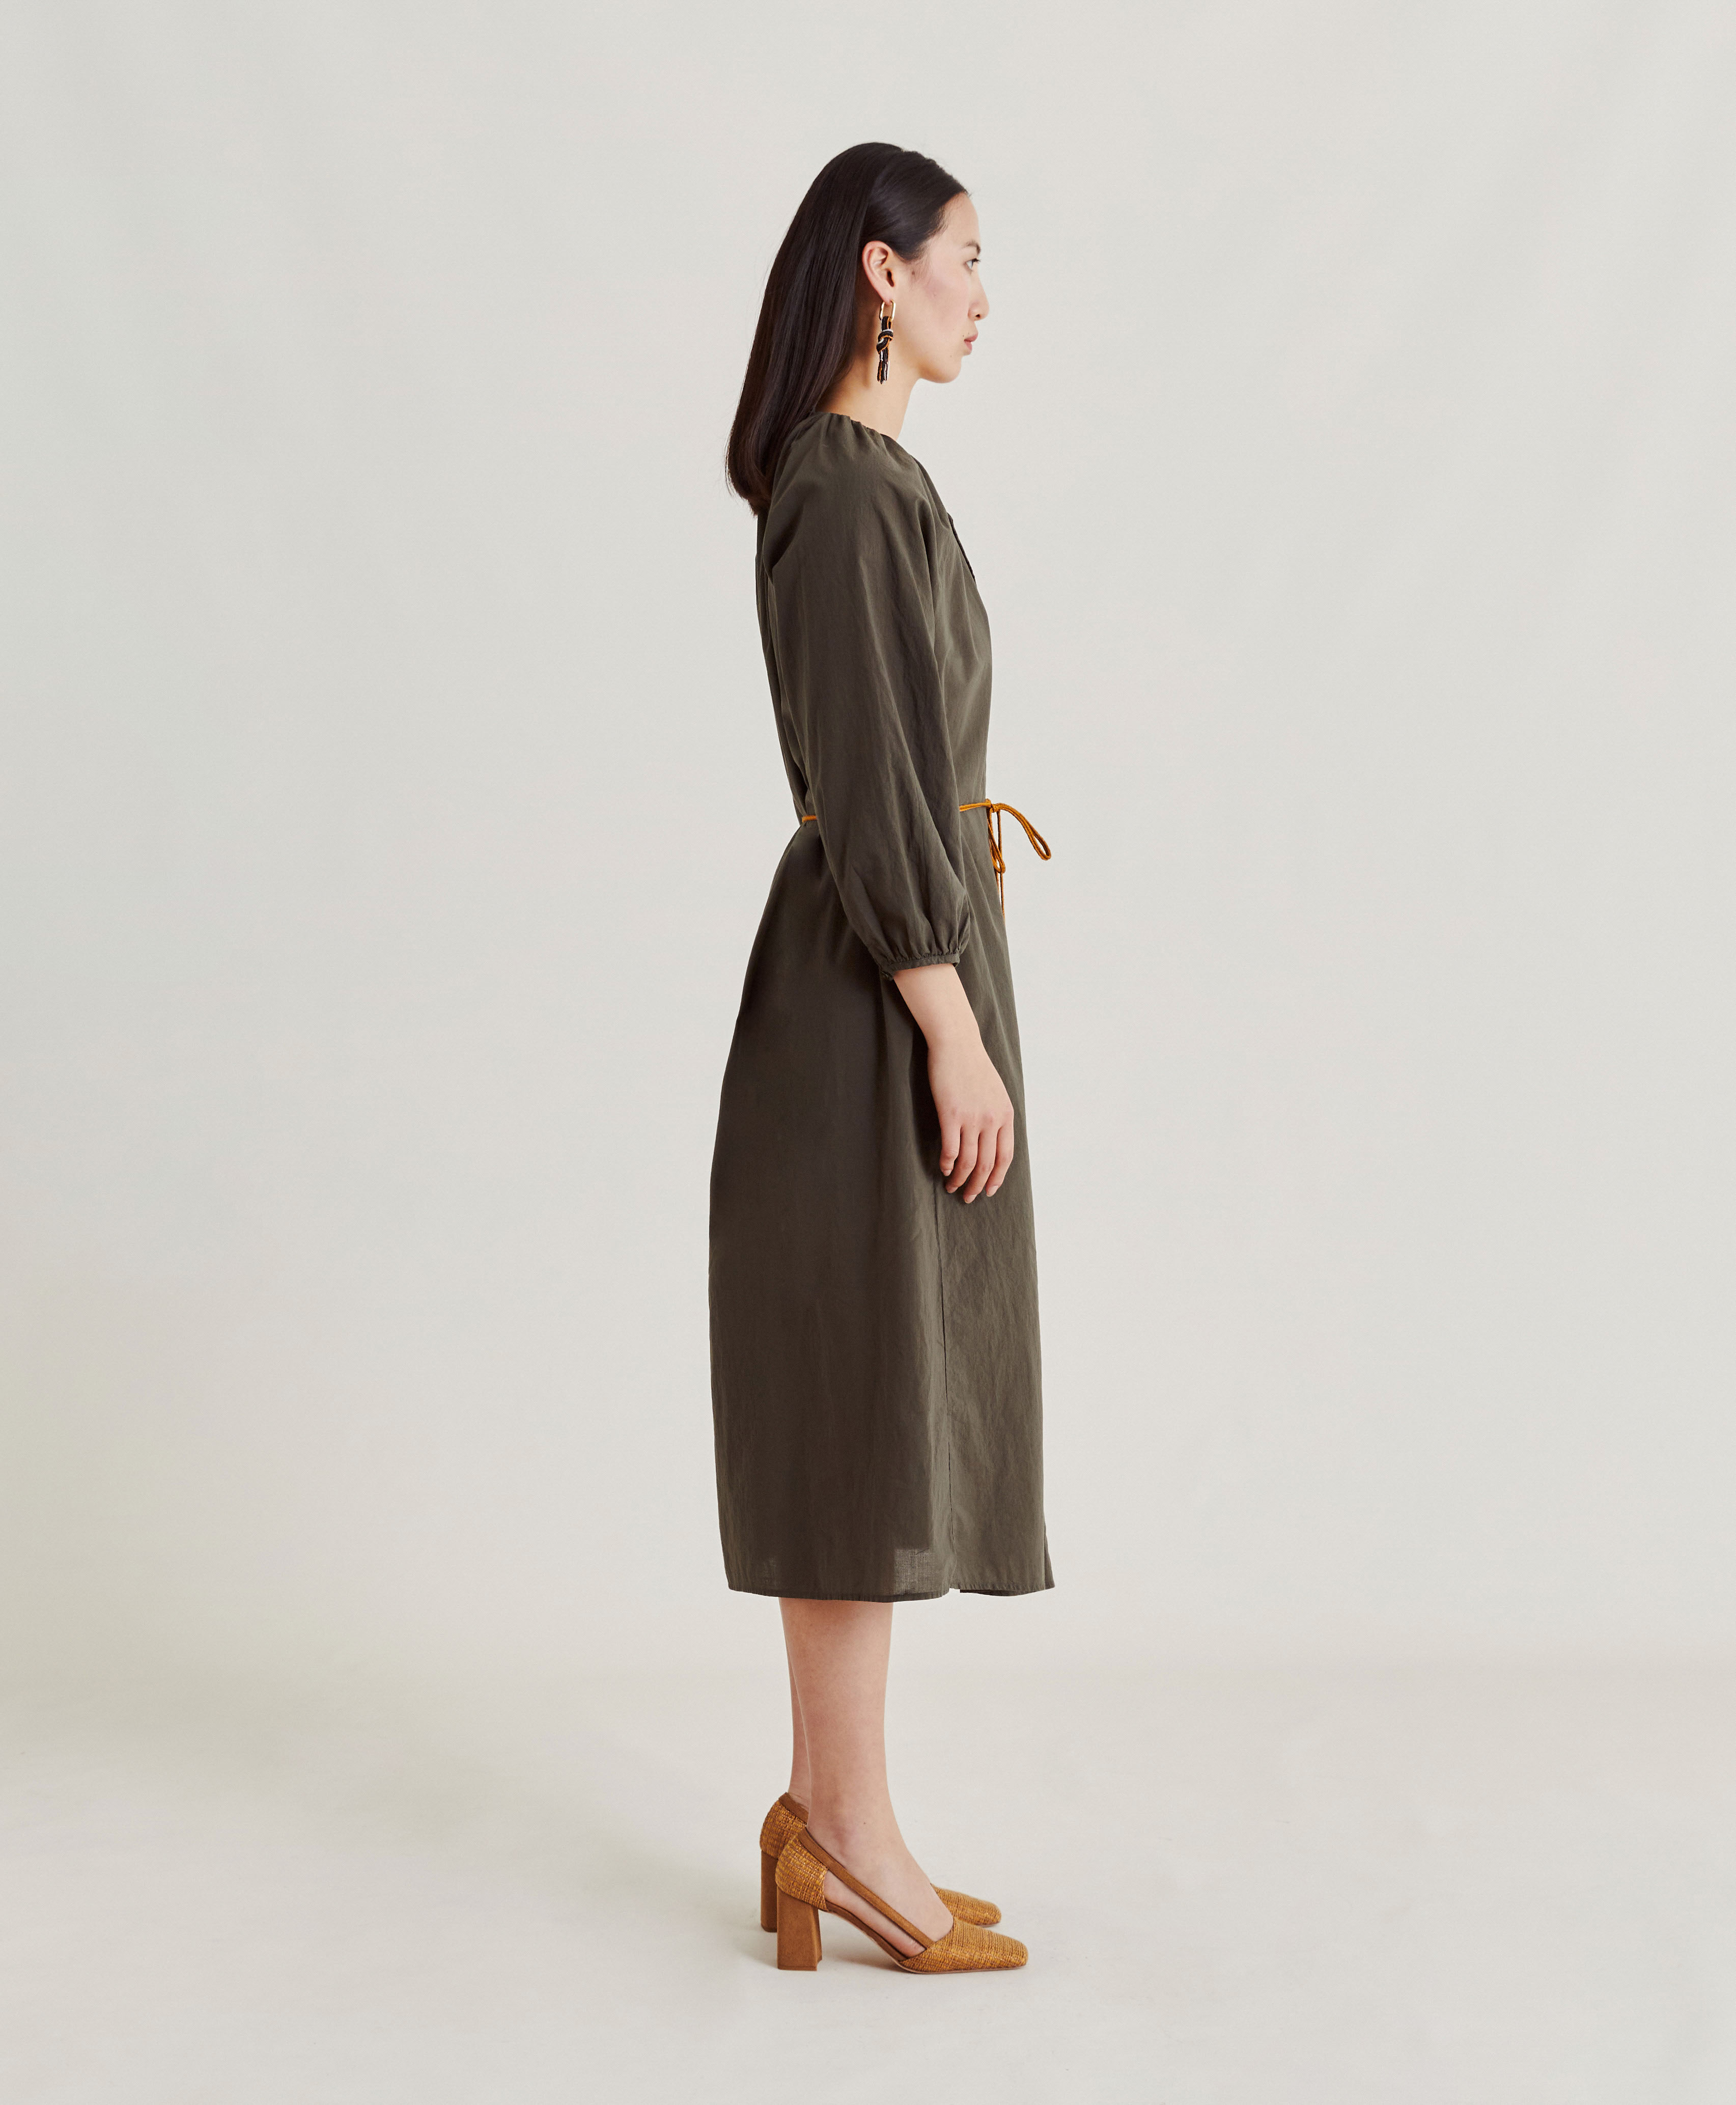 CALDES DRESS WITH COTTON VOILE - ARMY GREEN - Momonì